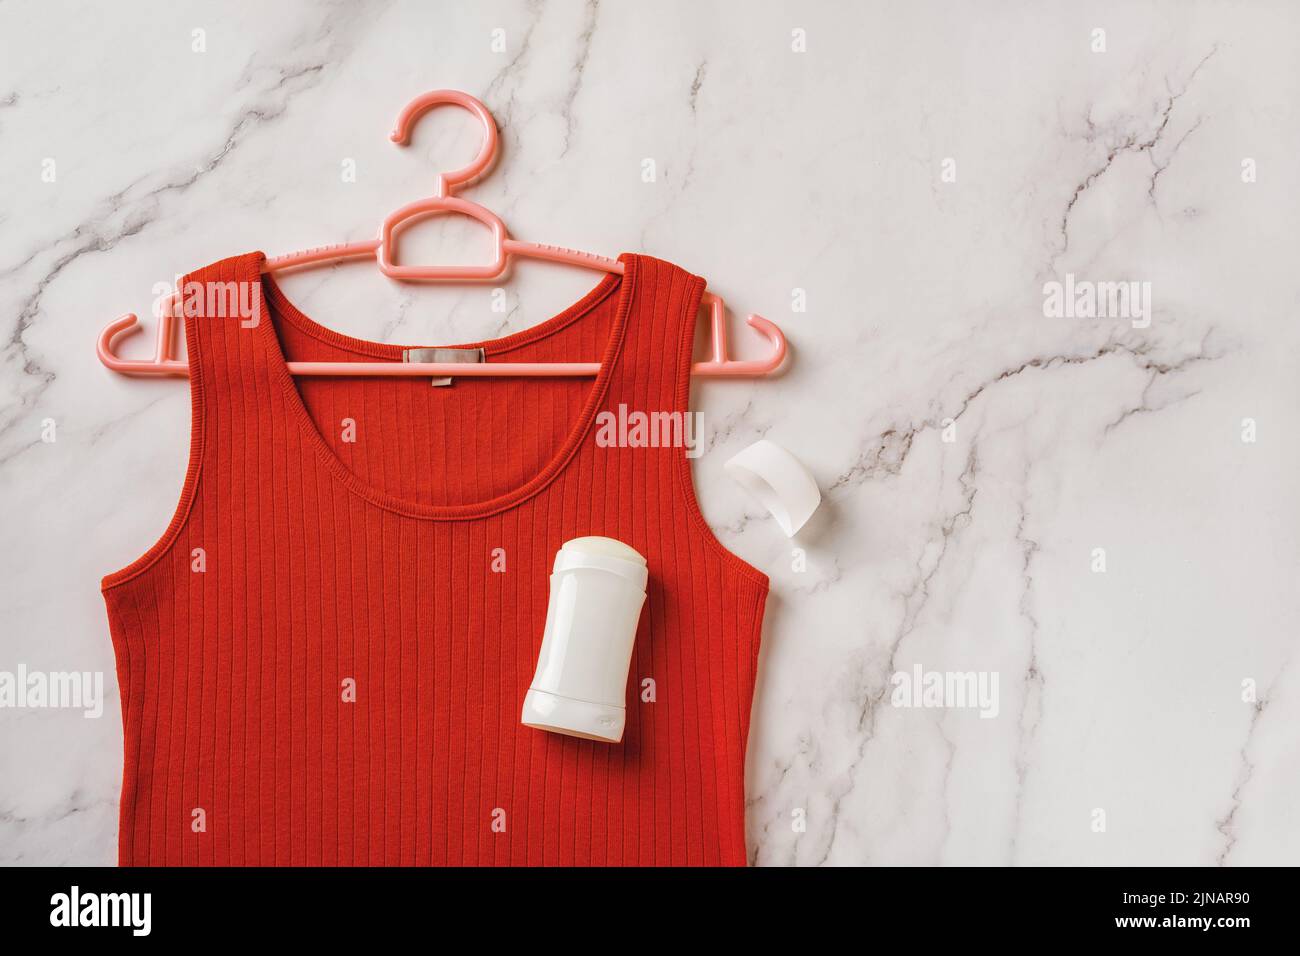 Red tank top on a hanger and solid antiperspirant over marble background. Deodorant stick on a linen jersey tank shirt. Prevent body odour, body care. Stock Photo